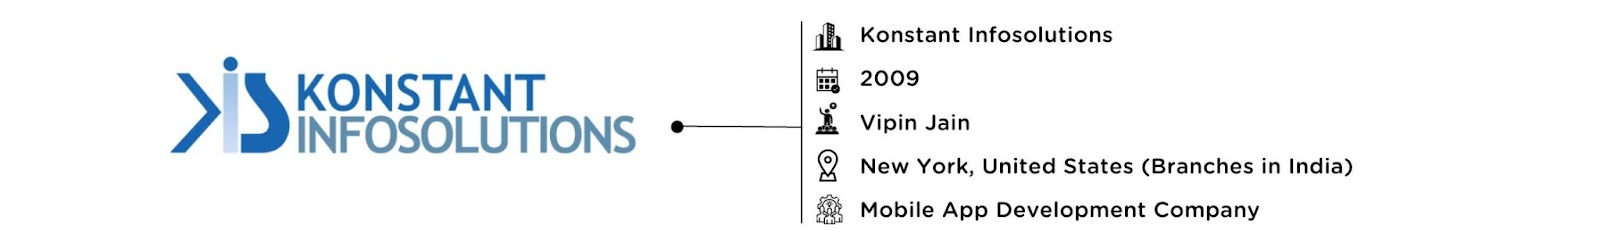 Konstant Infosolutions: Software Development Company in India